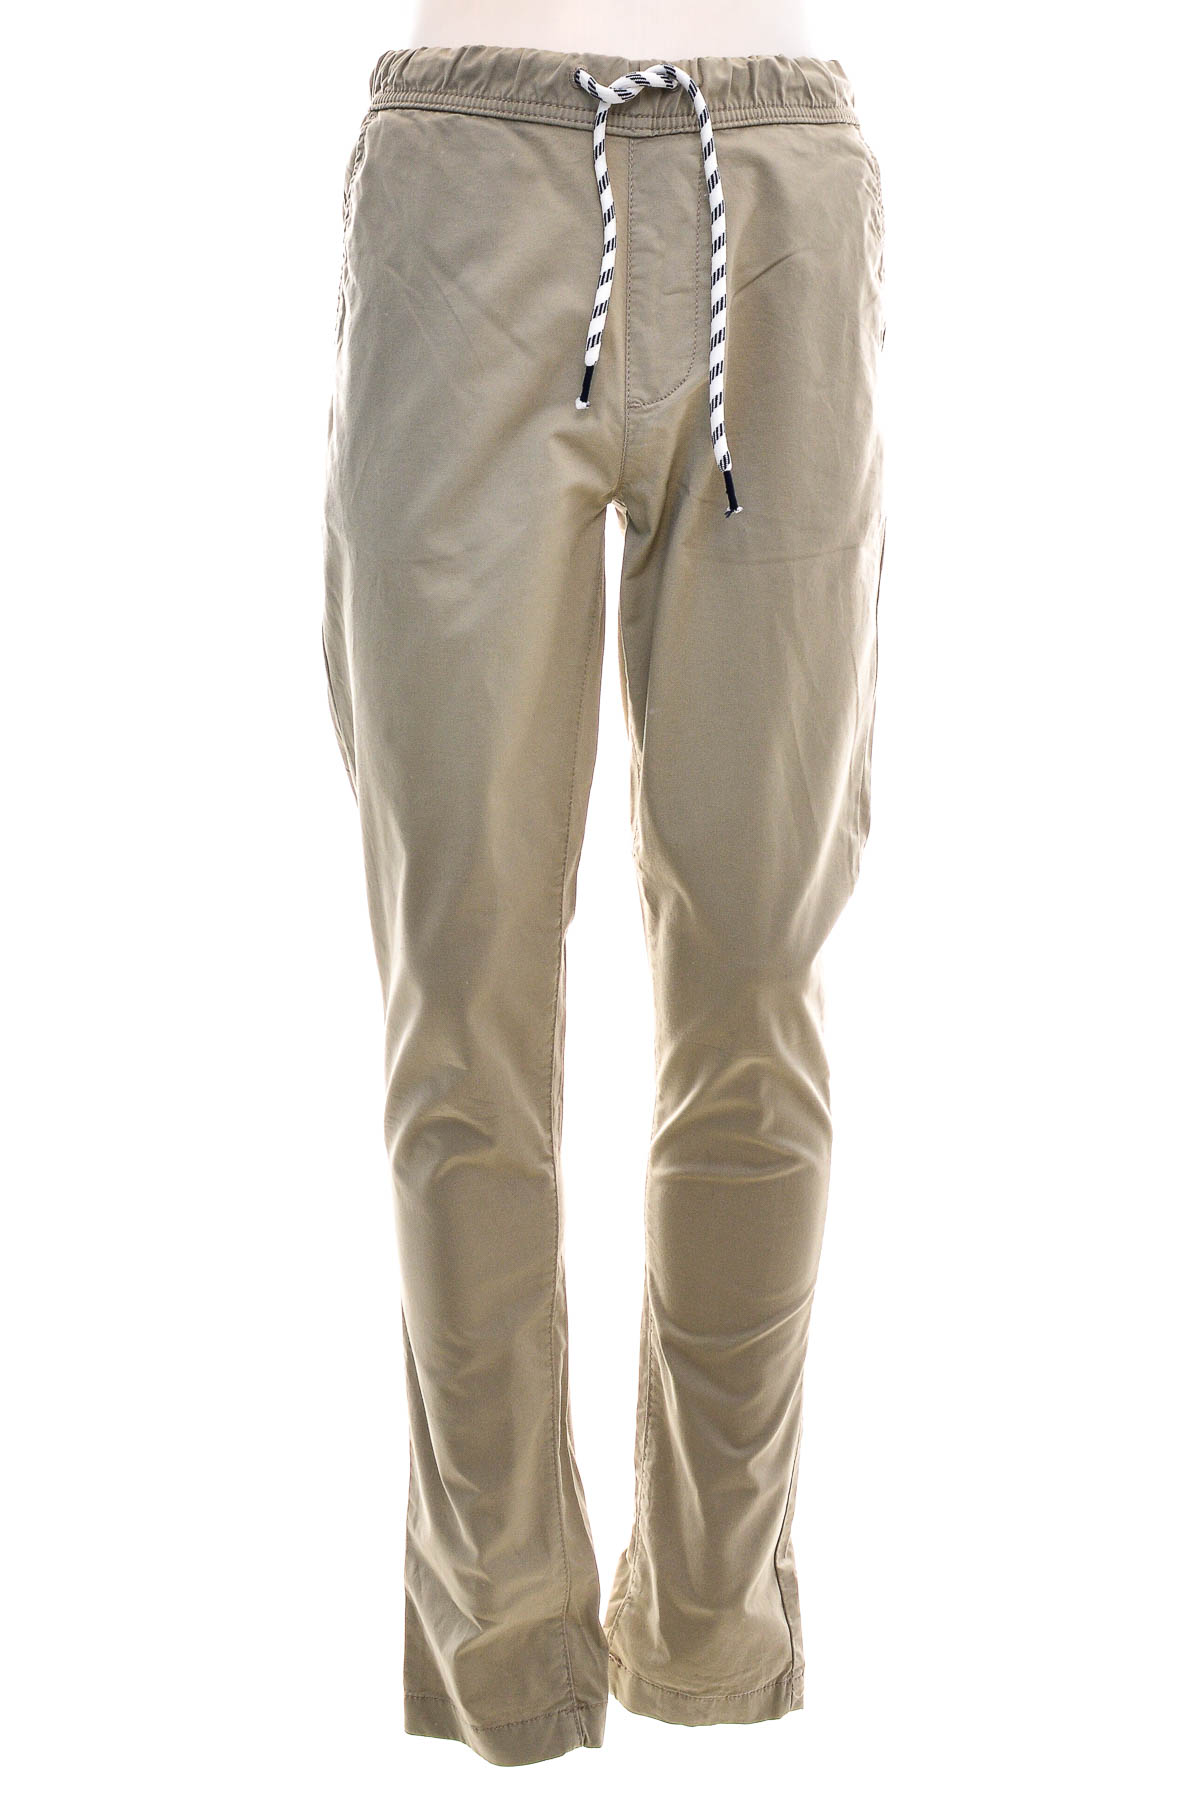 Men's trousers - Inspired By Simplicity By Tchibo - 0